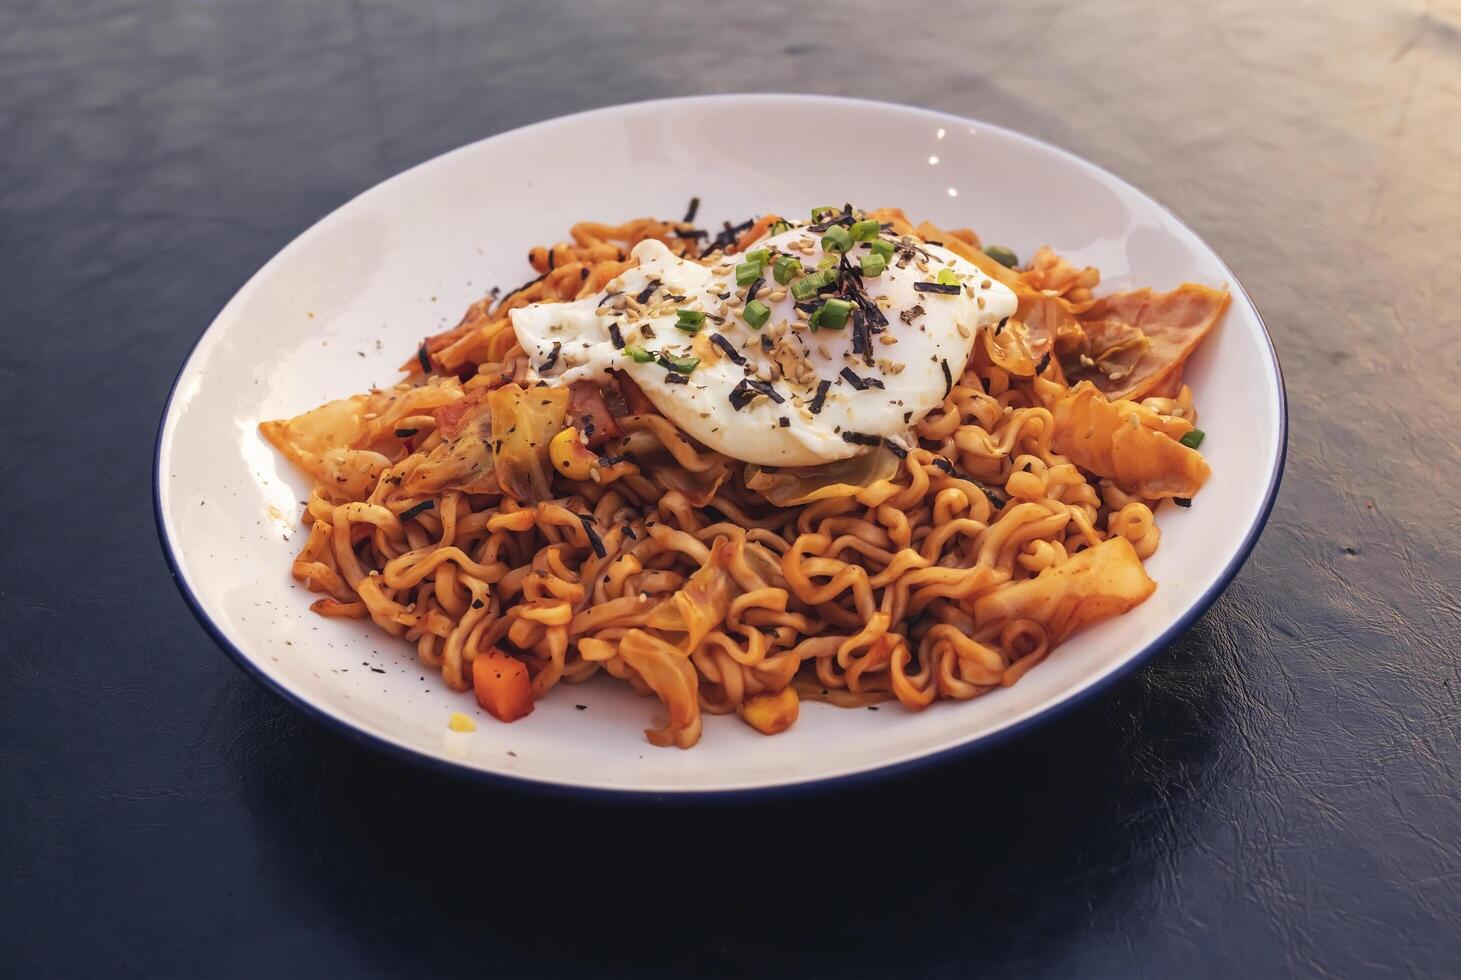 Stir fried noodles with fried egg topped with white sesame seeds and seaweed photo